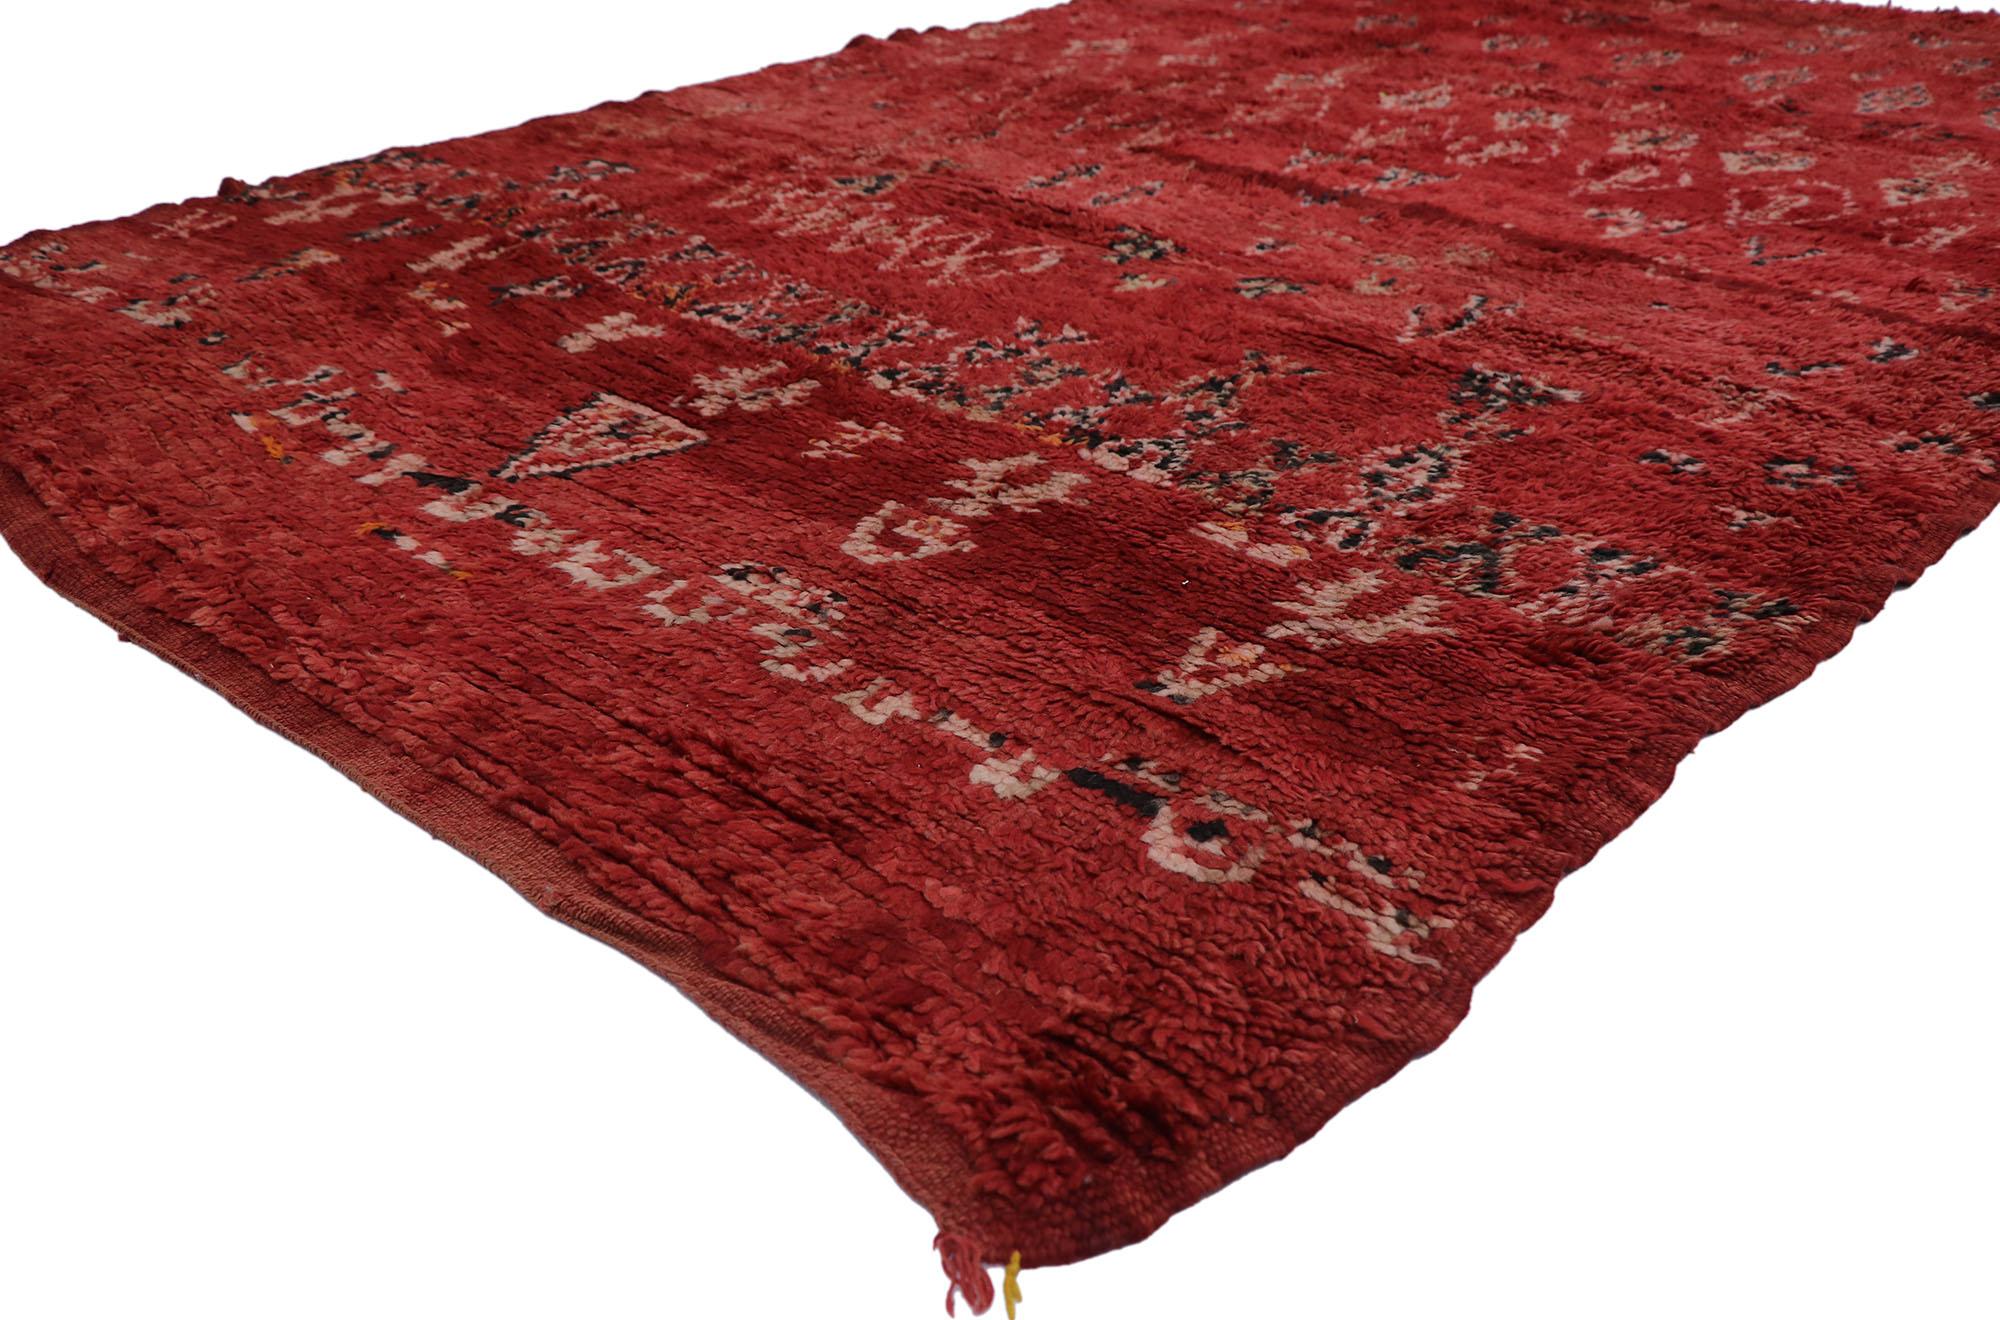 21671 Vintage Berber Red Moroccan rug with Tribal Style 06'00 x 10'00. Showcasing a bold expressive design, incredible detail and texture, this hand knotted wool vintage Berber red Moroccan rug is a captivating vision of woven beauty. The